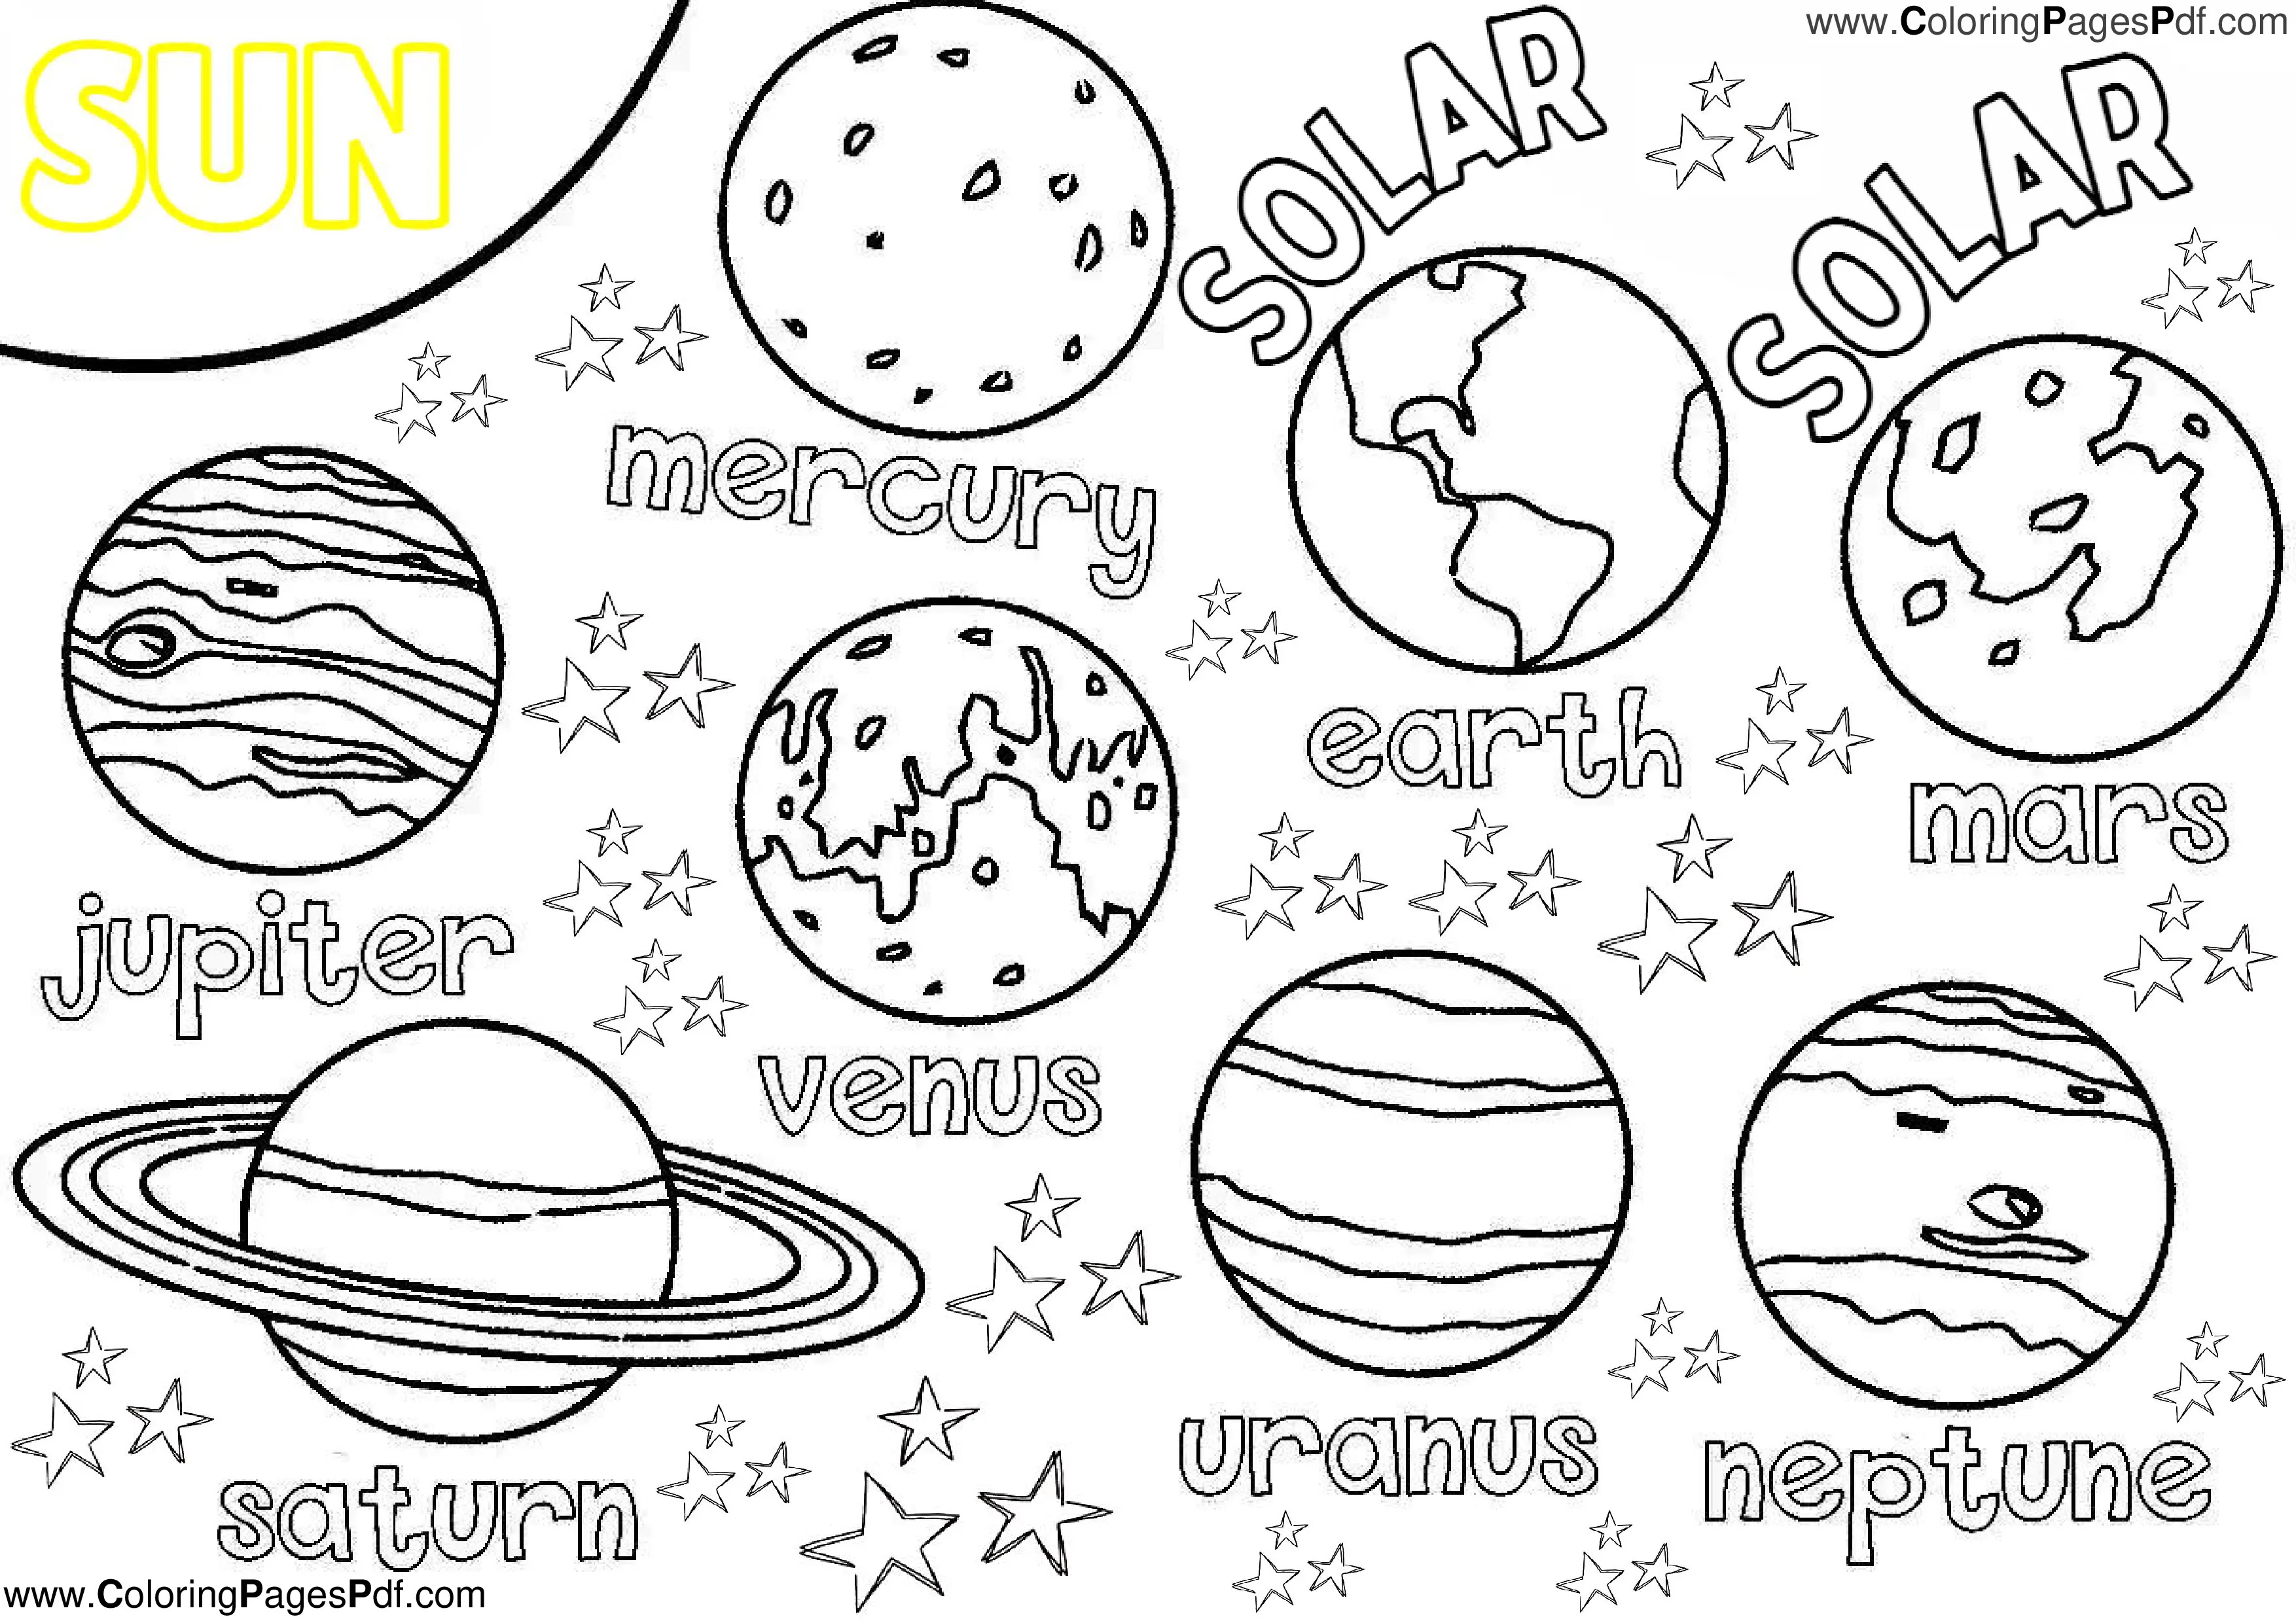 Best solar system coloring pages